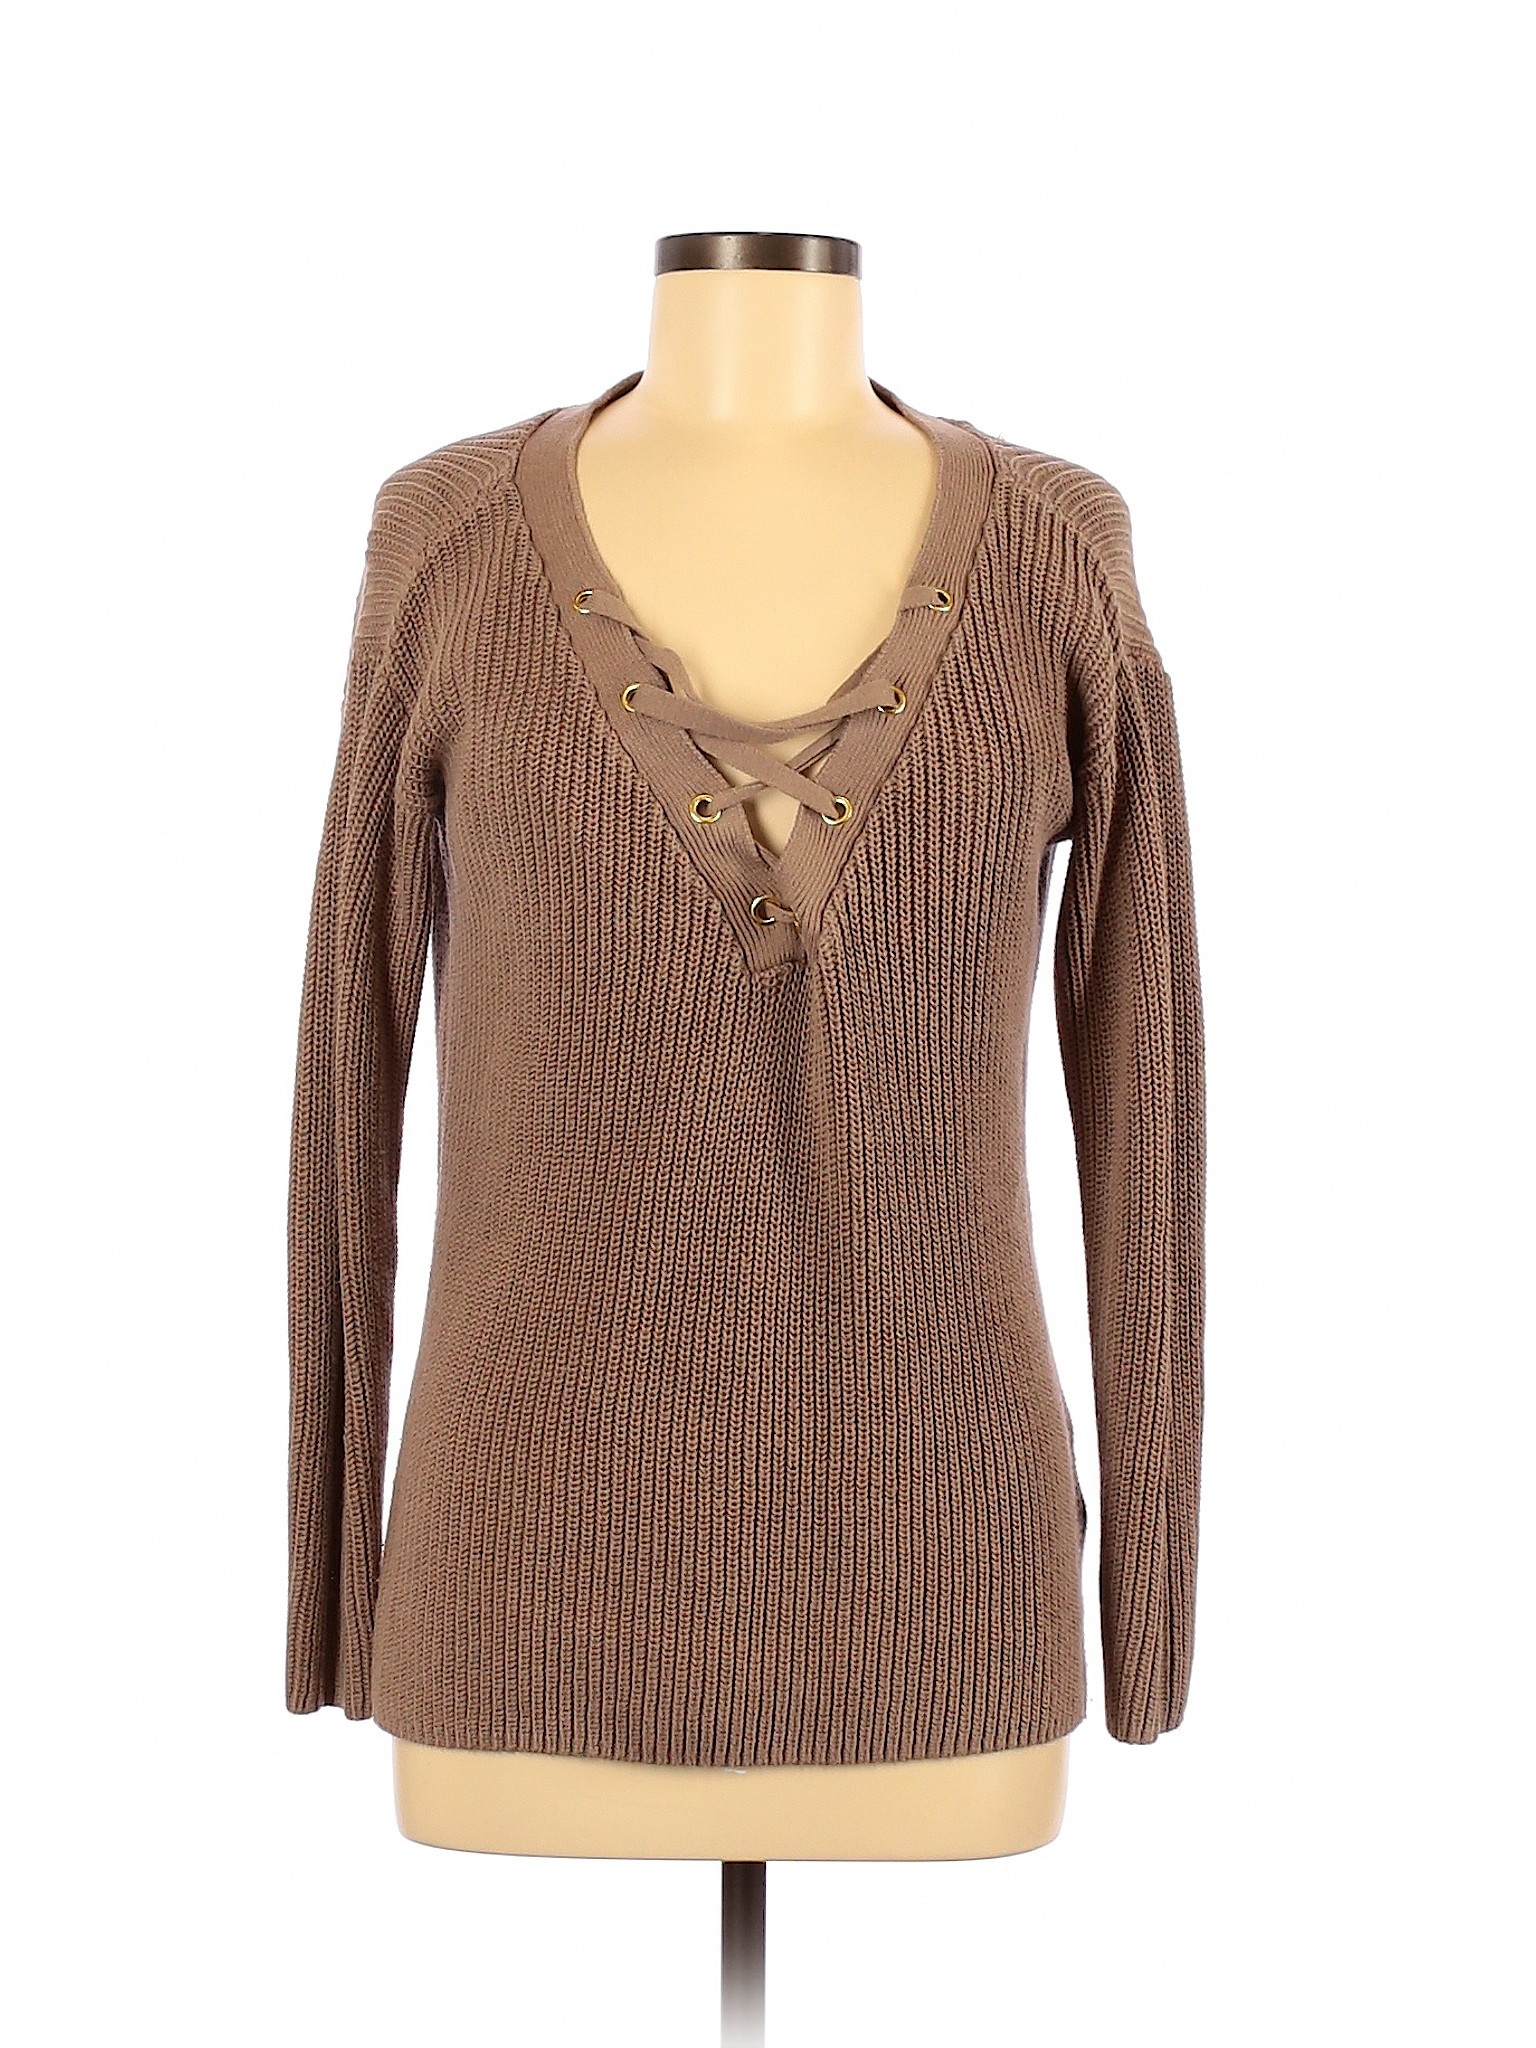 Guess Women Brown Pullover Sweater M | eBay